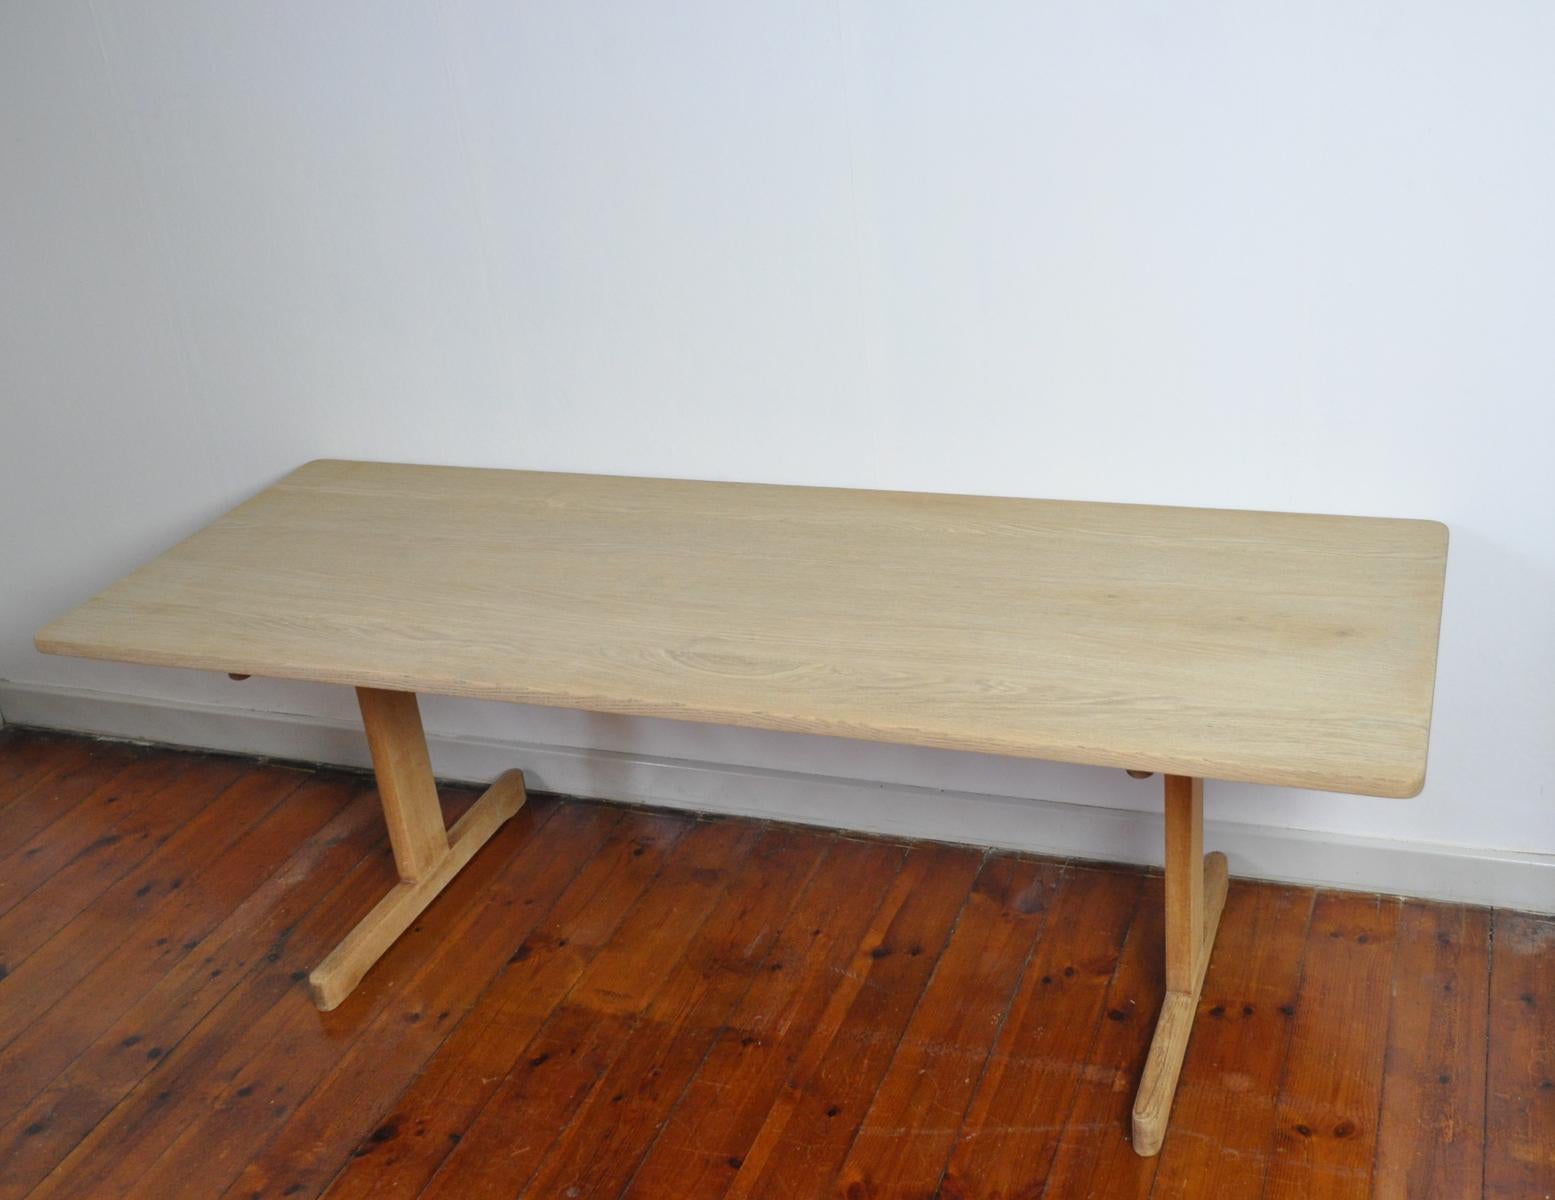 Mid-Century Modern Børge Mogensen Coffee Table in Solid Oak for C.M. Madsens Fabrik, 1960s For Sale